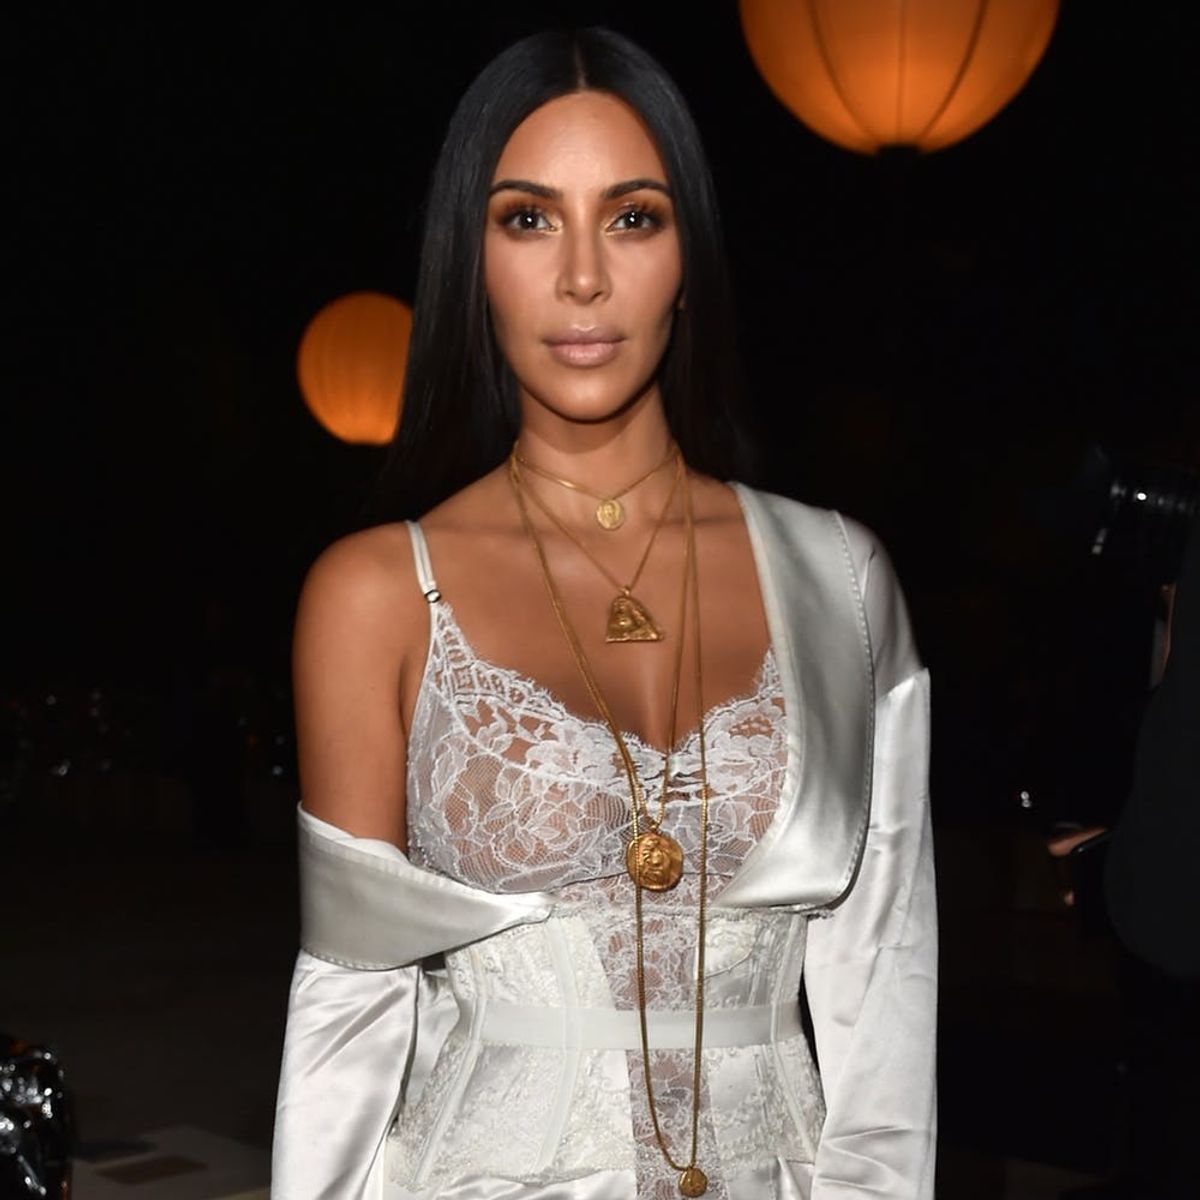 Kim Kardashian West Just Responded to the Immigration Ban in the Best Way Possible + 12 More Celeb Reactions